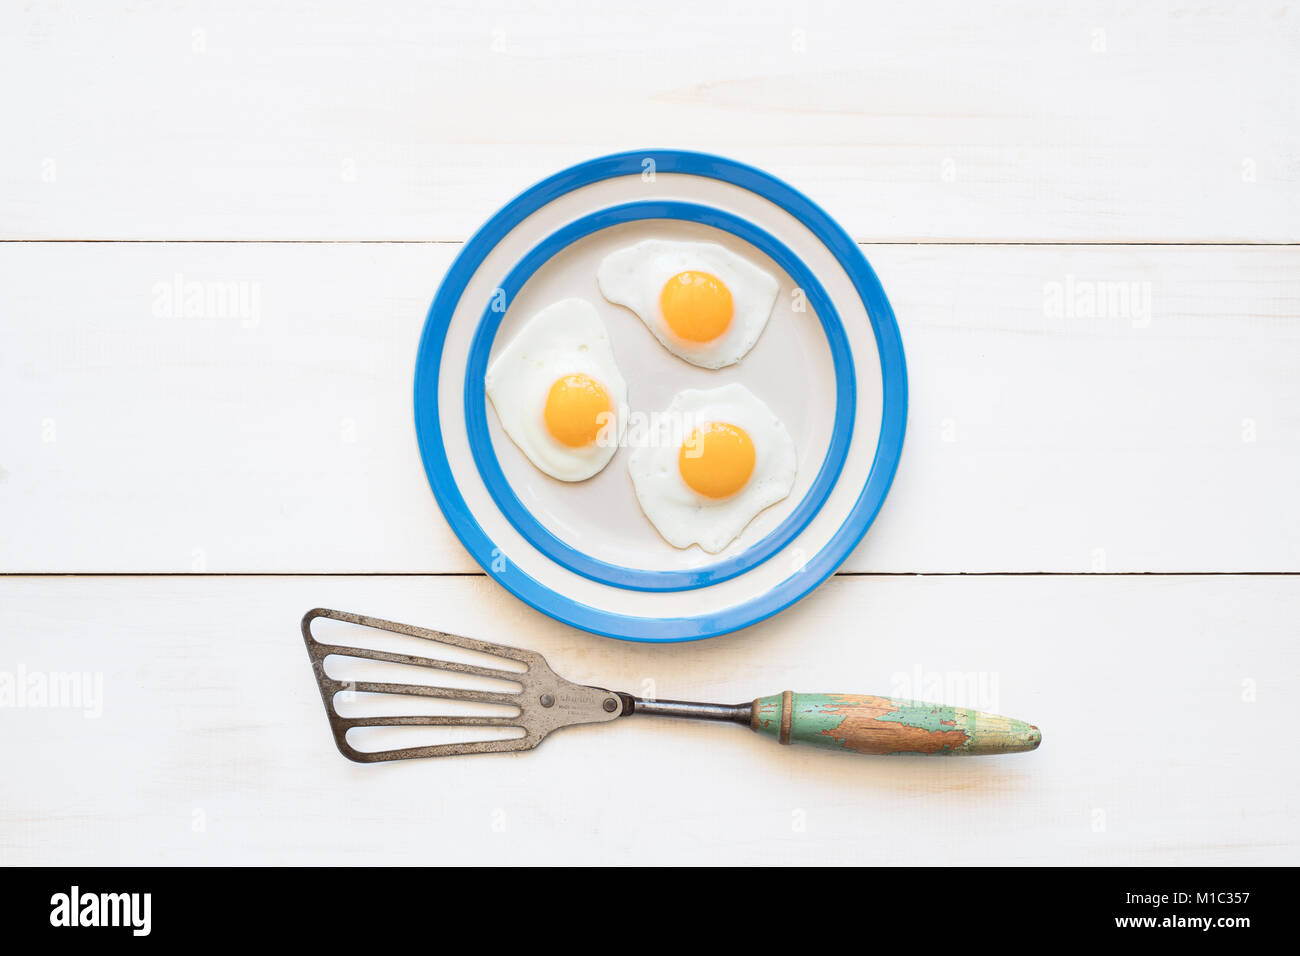 Fried Quail Eggs on a cornishware plate with a vintage spatula from above Stock Photo